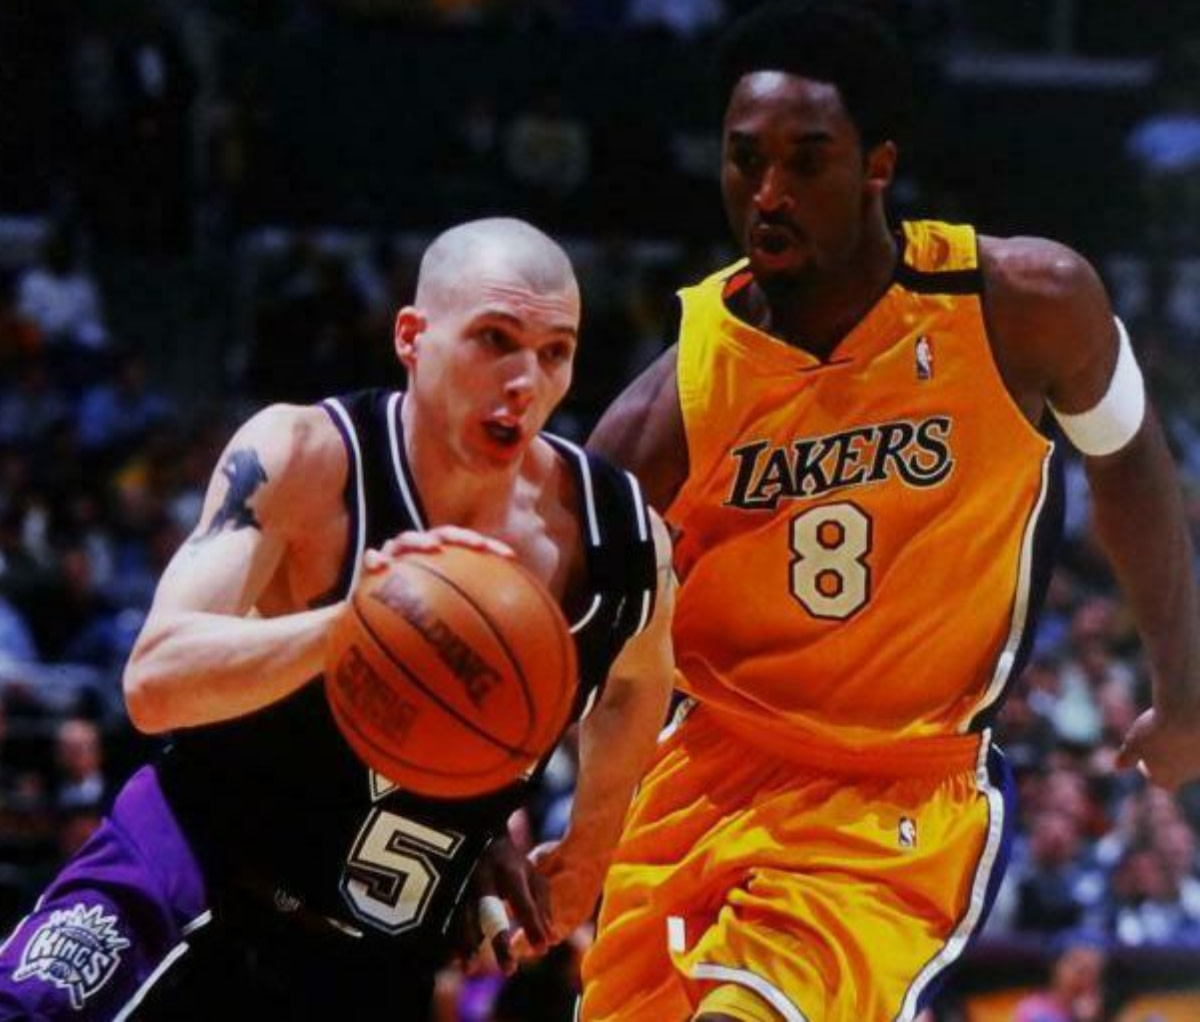 Lakers Fans Roast Jason Williams For Saying Kobe Bryant Isn't Top 5 In Lakers History: "Nobody Cares What Jason Williams Has To Say."